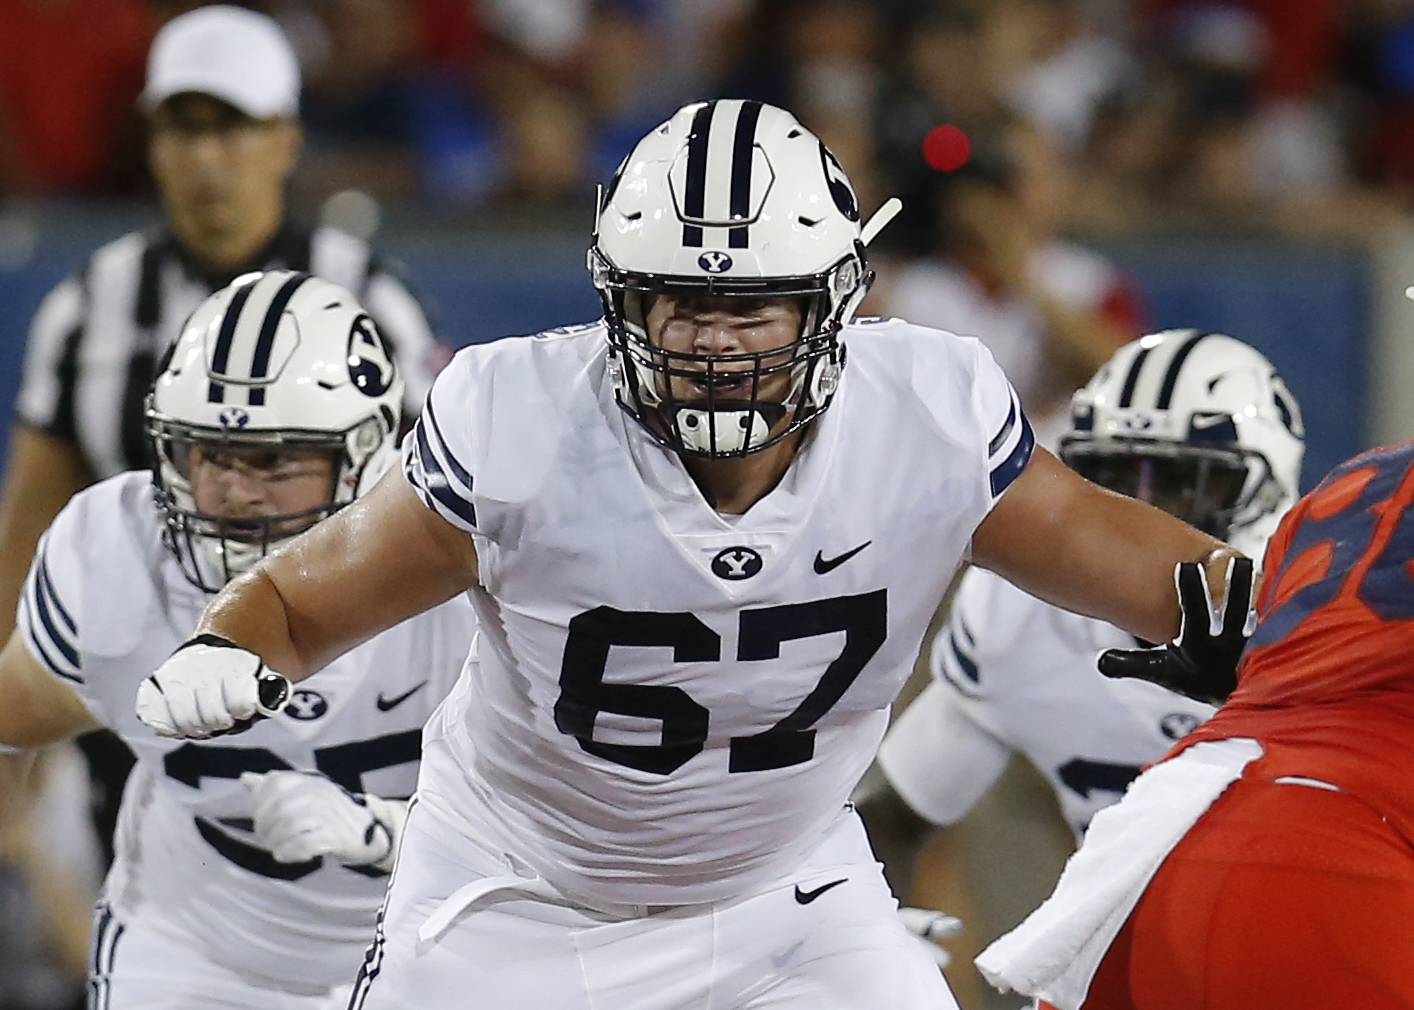 After big NFL draft weekend, BYU now has a solid foundation to build on